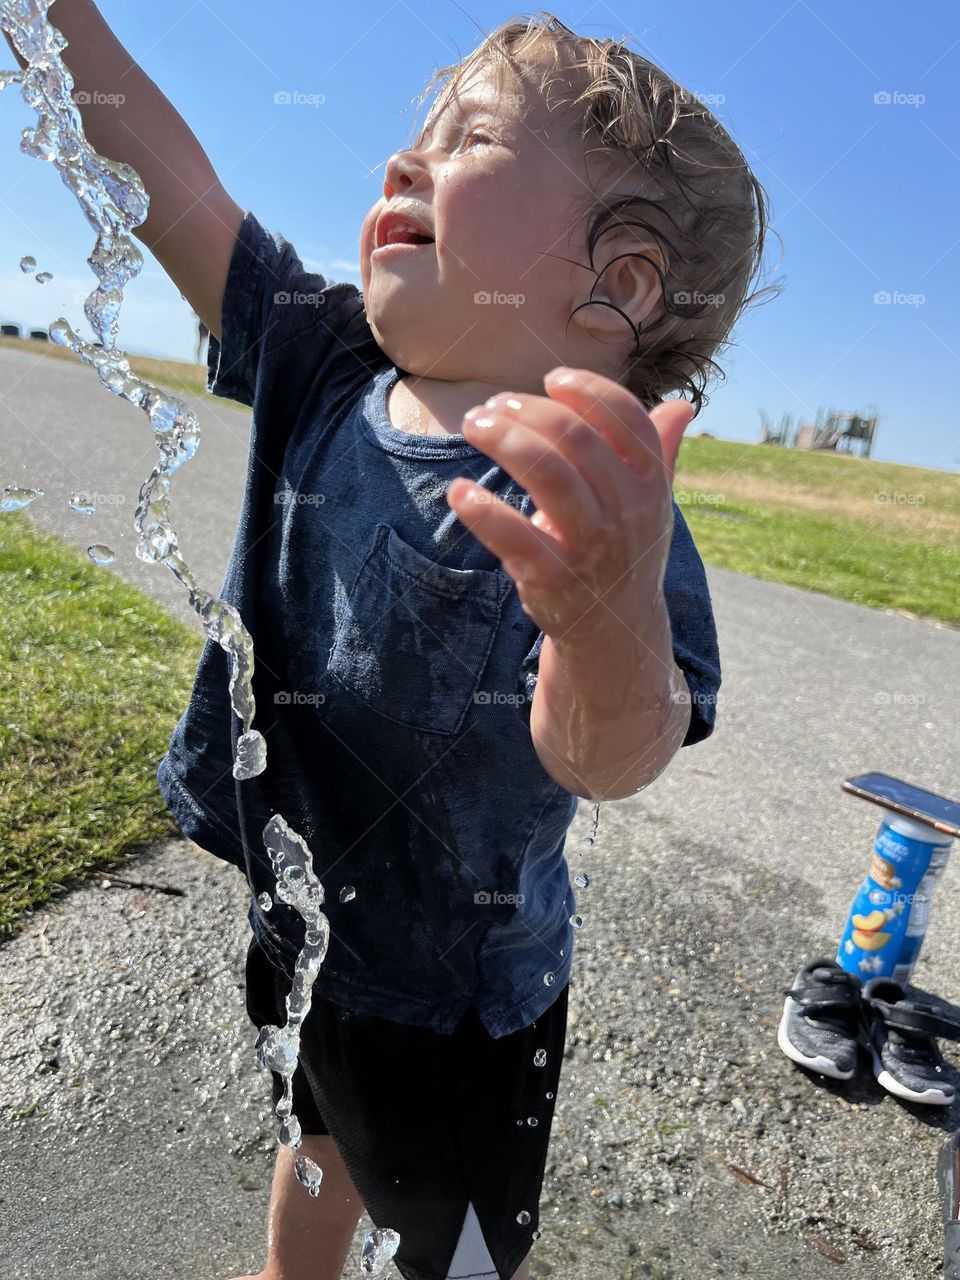 Playing with water 